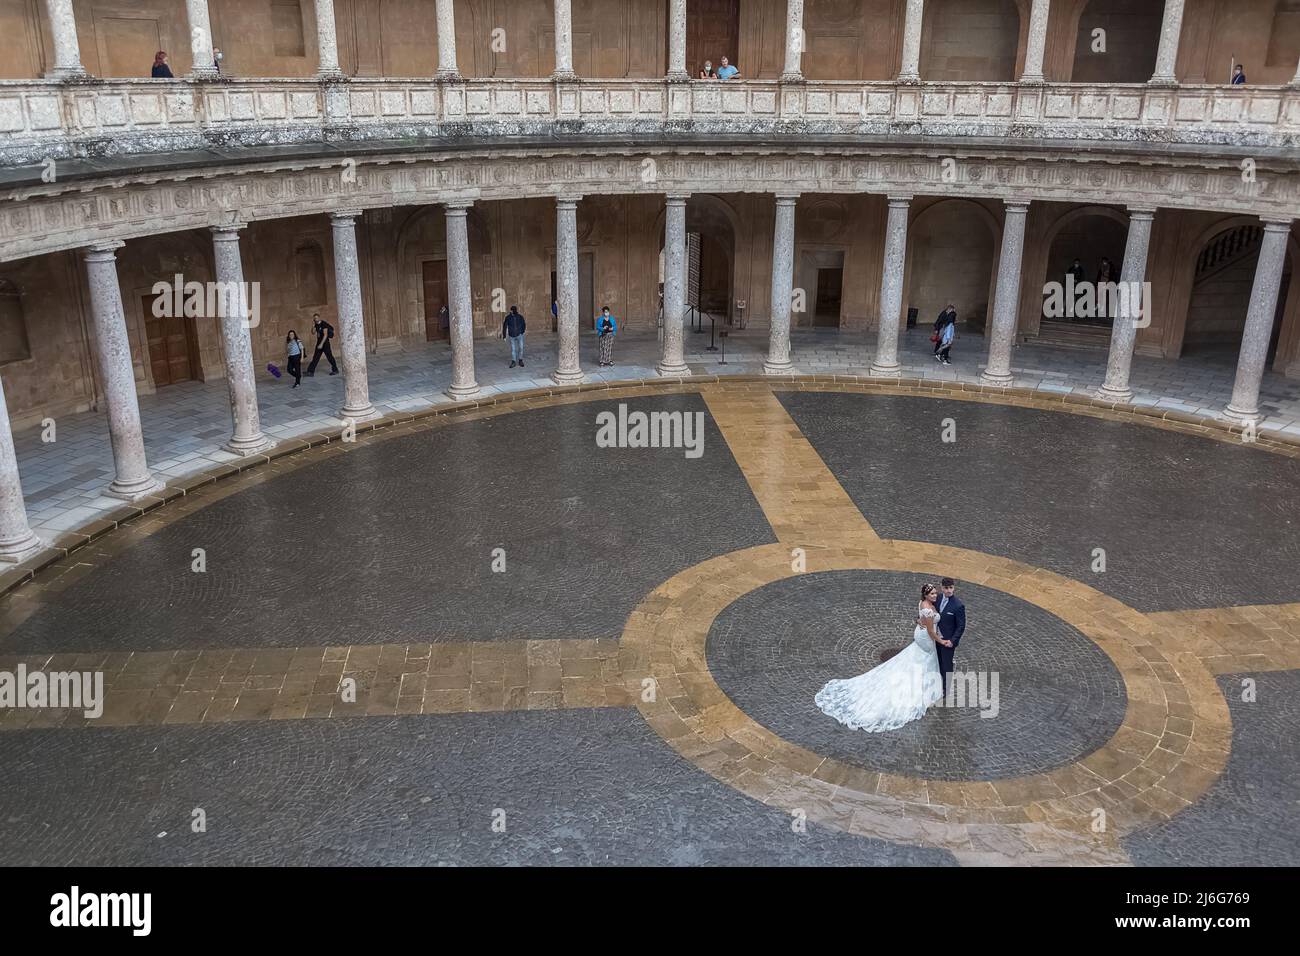 Granada Spain - 09 14 2021: Interior circular Patio on Charles V Palace, wedding couple taking pictures on center at the Patio, Renaissance building l Stock Photo